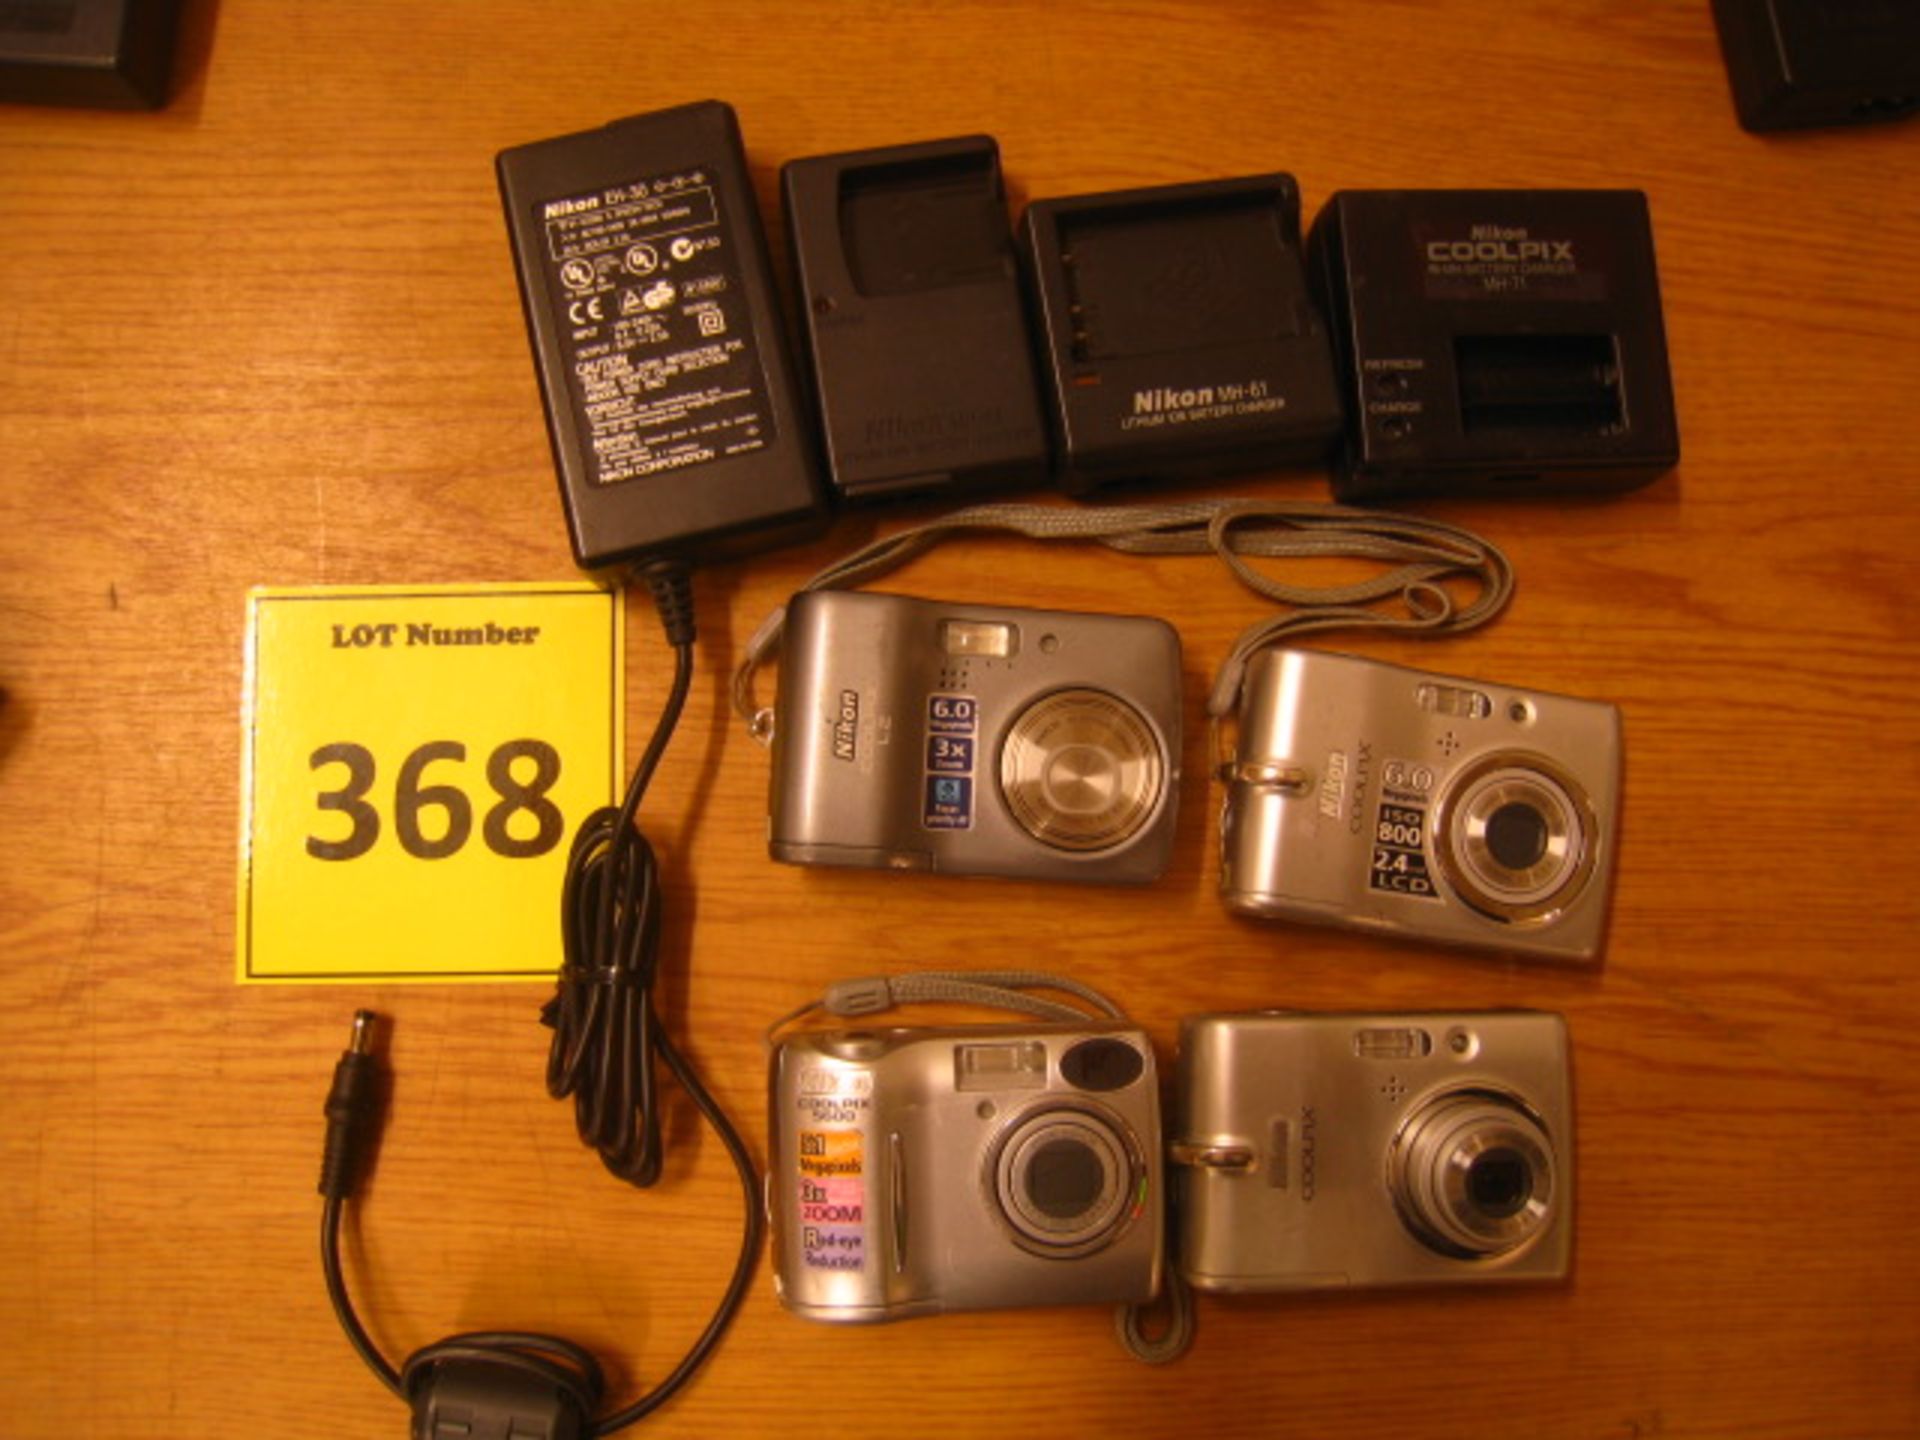 Nikon. 4 x Nikon digital cameras and 4 assorted Nikon battery charges. All untested.